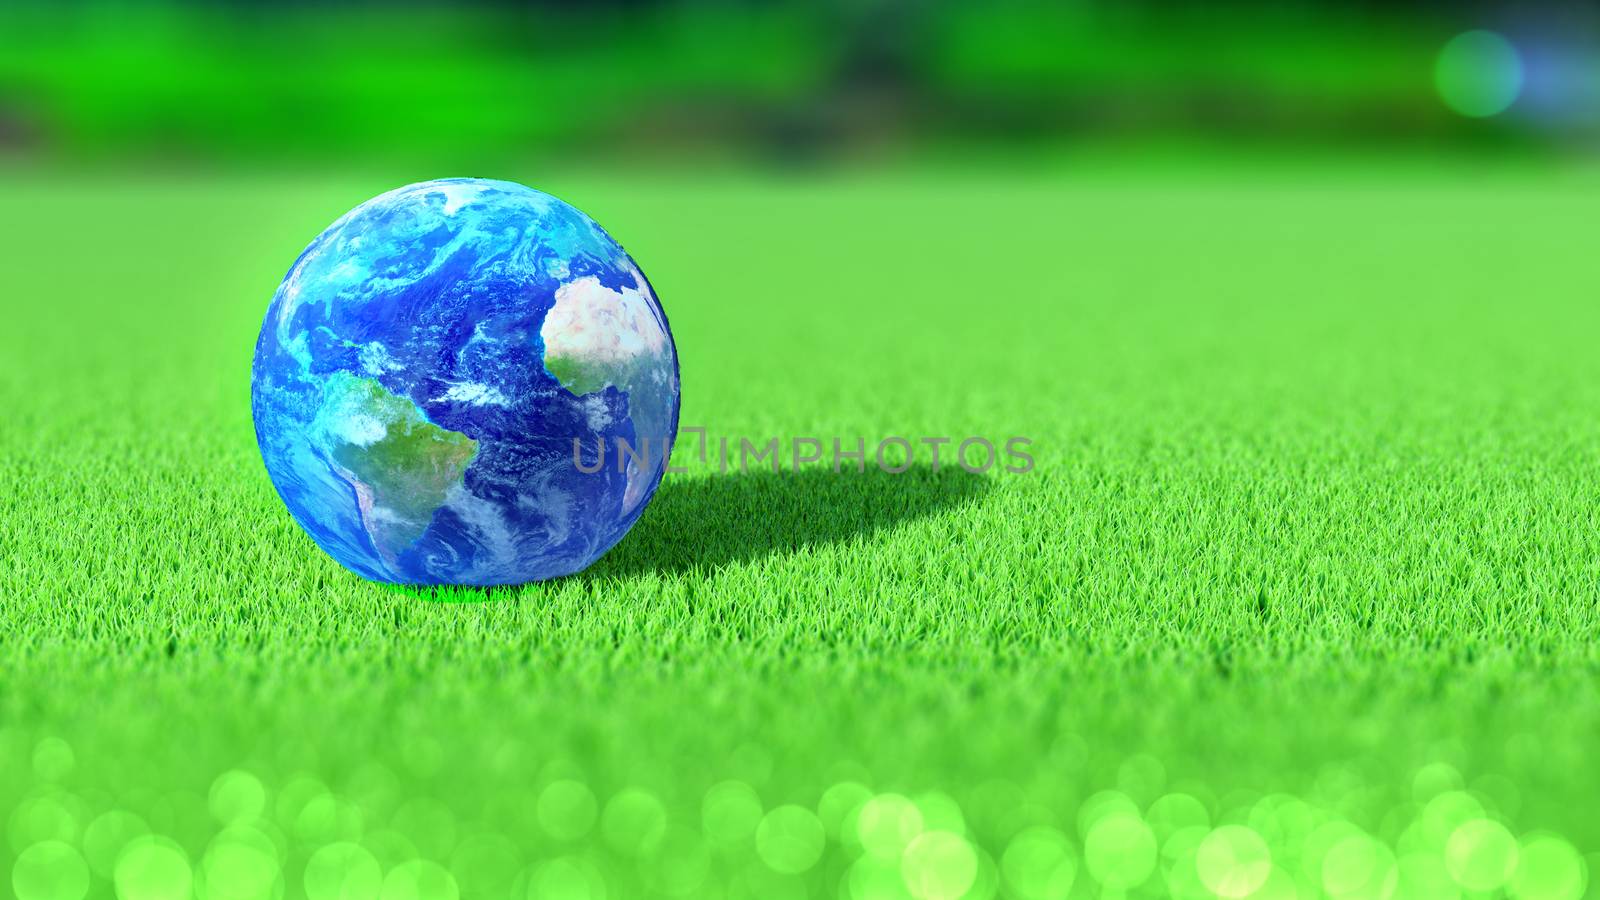 Planet Earth on the golf green course. America, Africa, Europe. Concept. 3D rendering. by ytjo